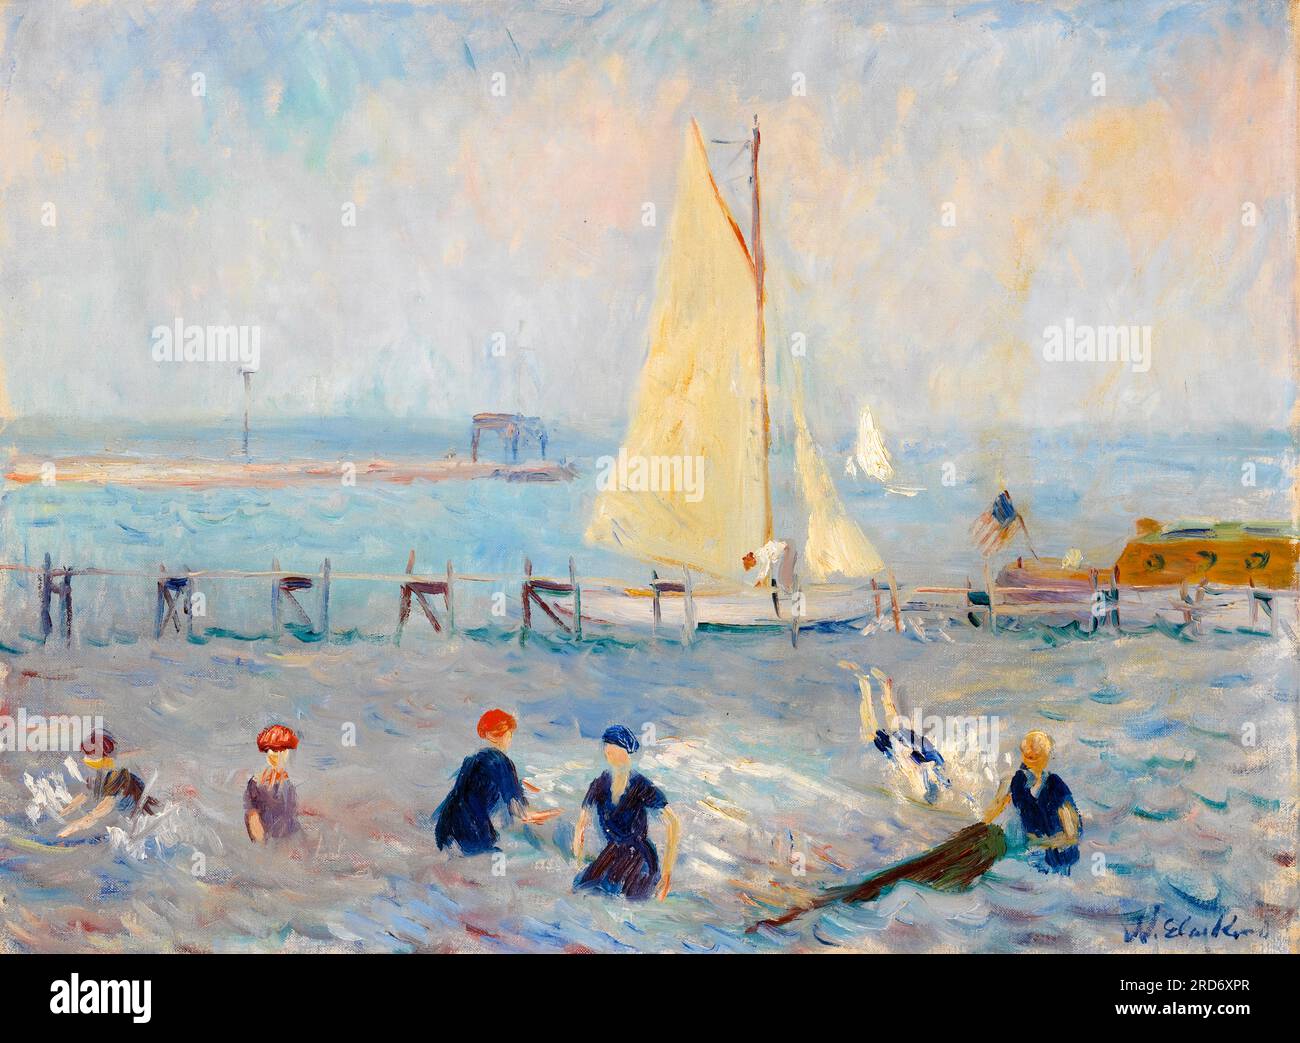 William Glackens, Seascape with Six Bathers, Bellport, painting in oil on canvas, circa 1915 Stock Photo